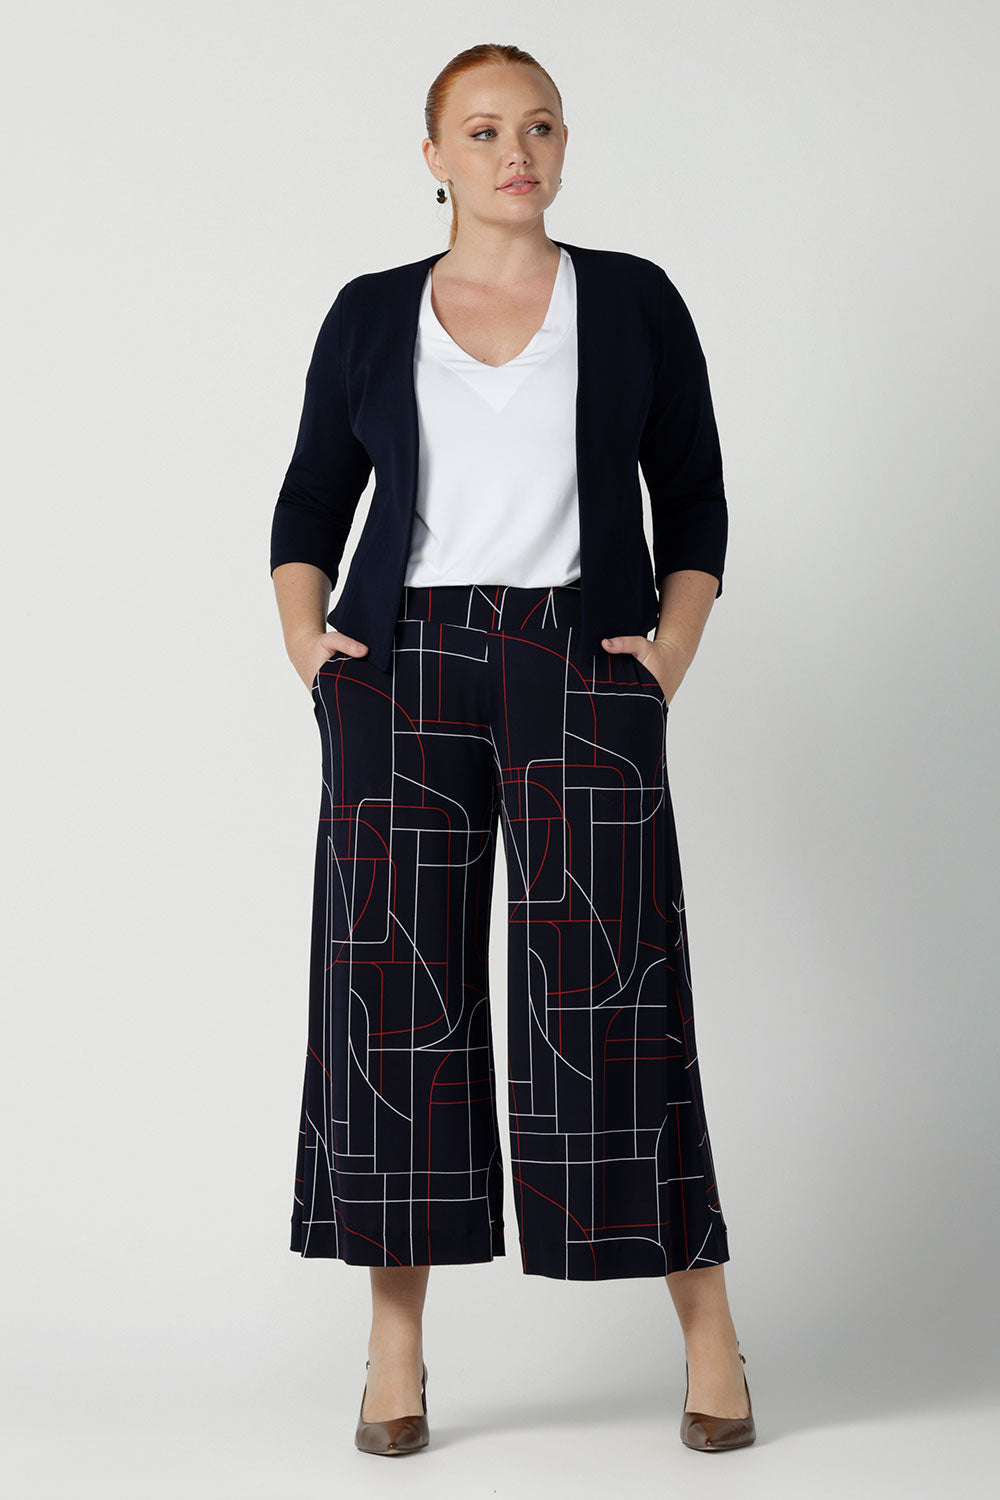 A size 12 woman wears the Dany Culotte in Navy Abstract. Corporate comfortable pant for women, geometric print with navy, red and white. Made in Australia for women size 8 - 24.